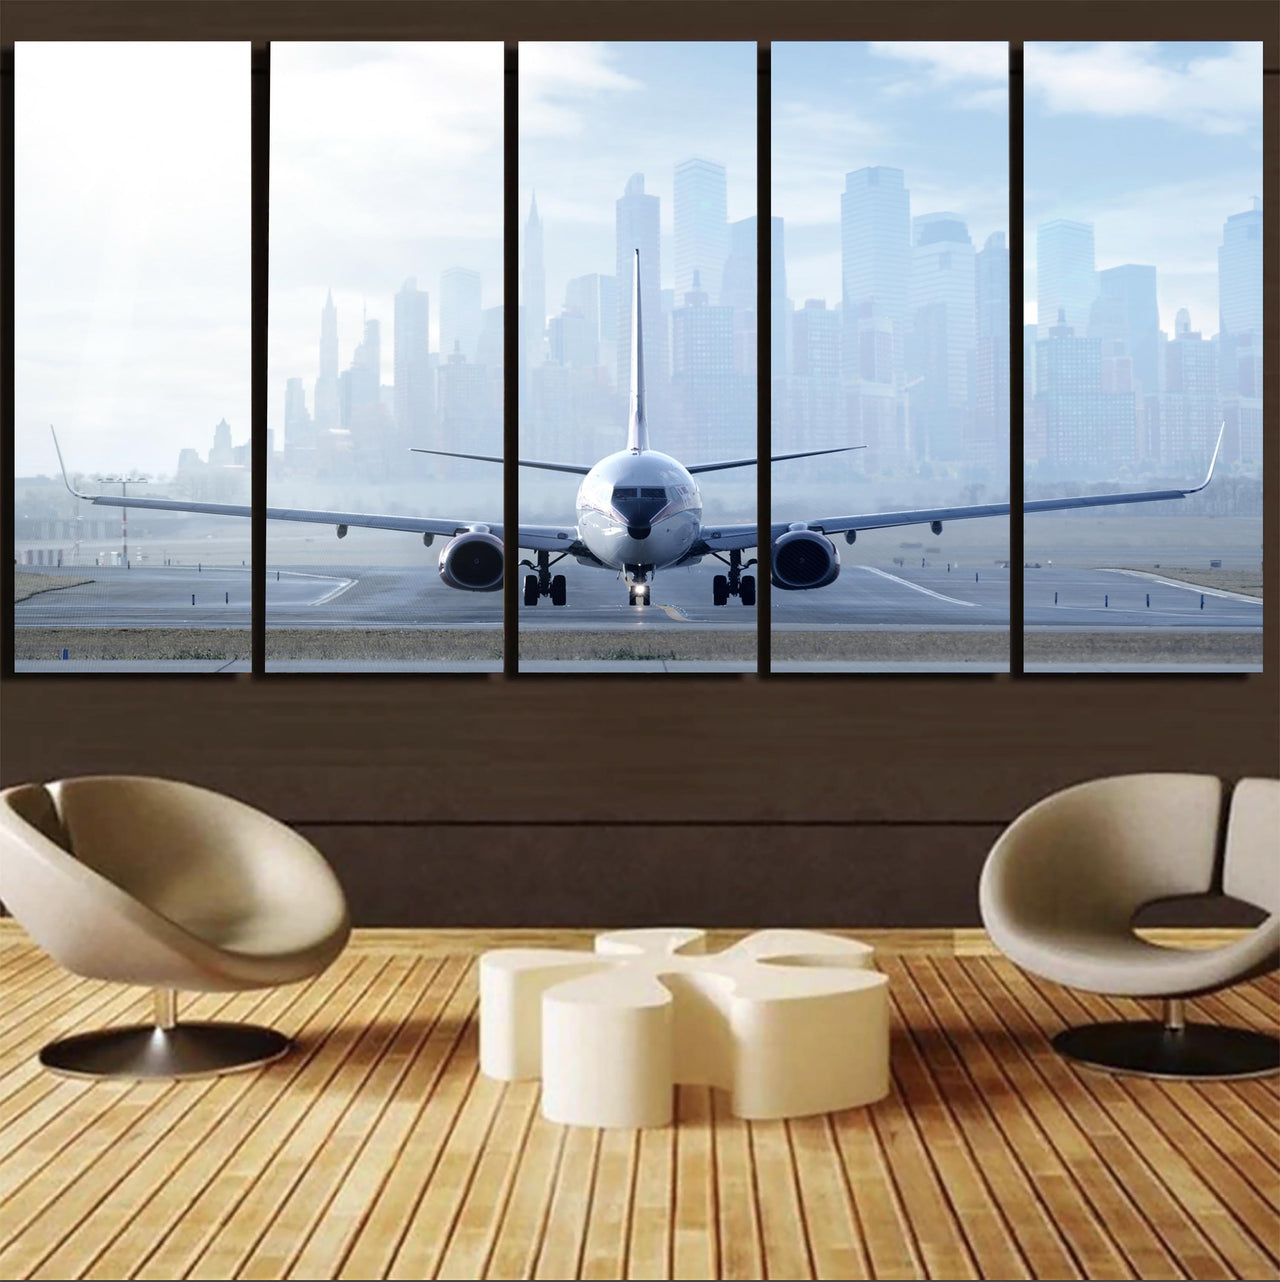 Boeing 737 & City View Behind Printed Canvas Prints (5 Pieces)